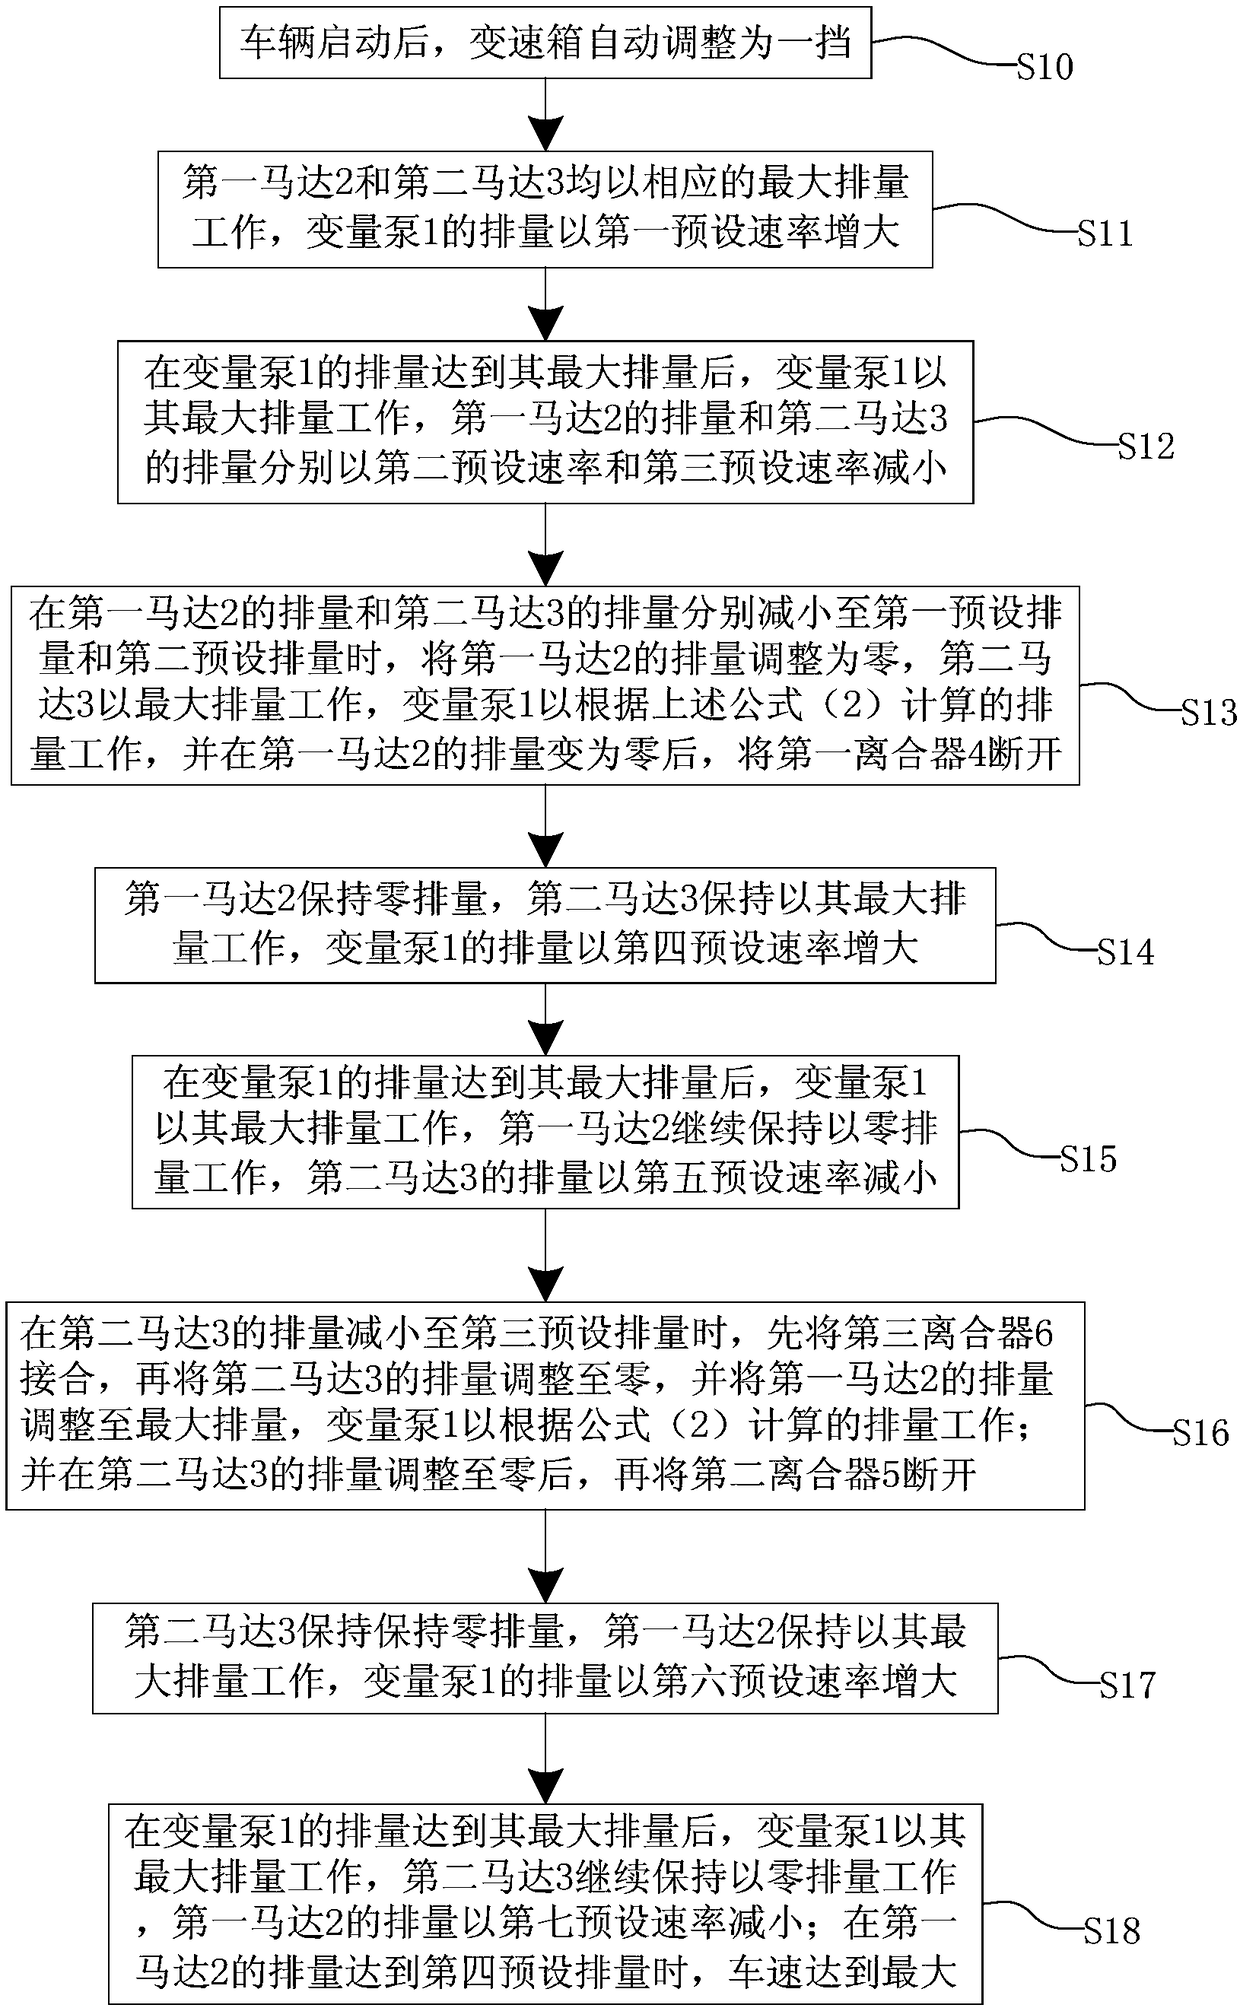 Vehicle gear shifting control system, driving gear shifting control method and loading machine